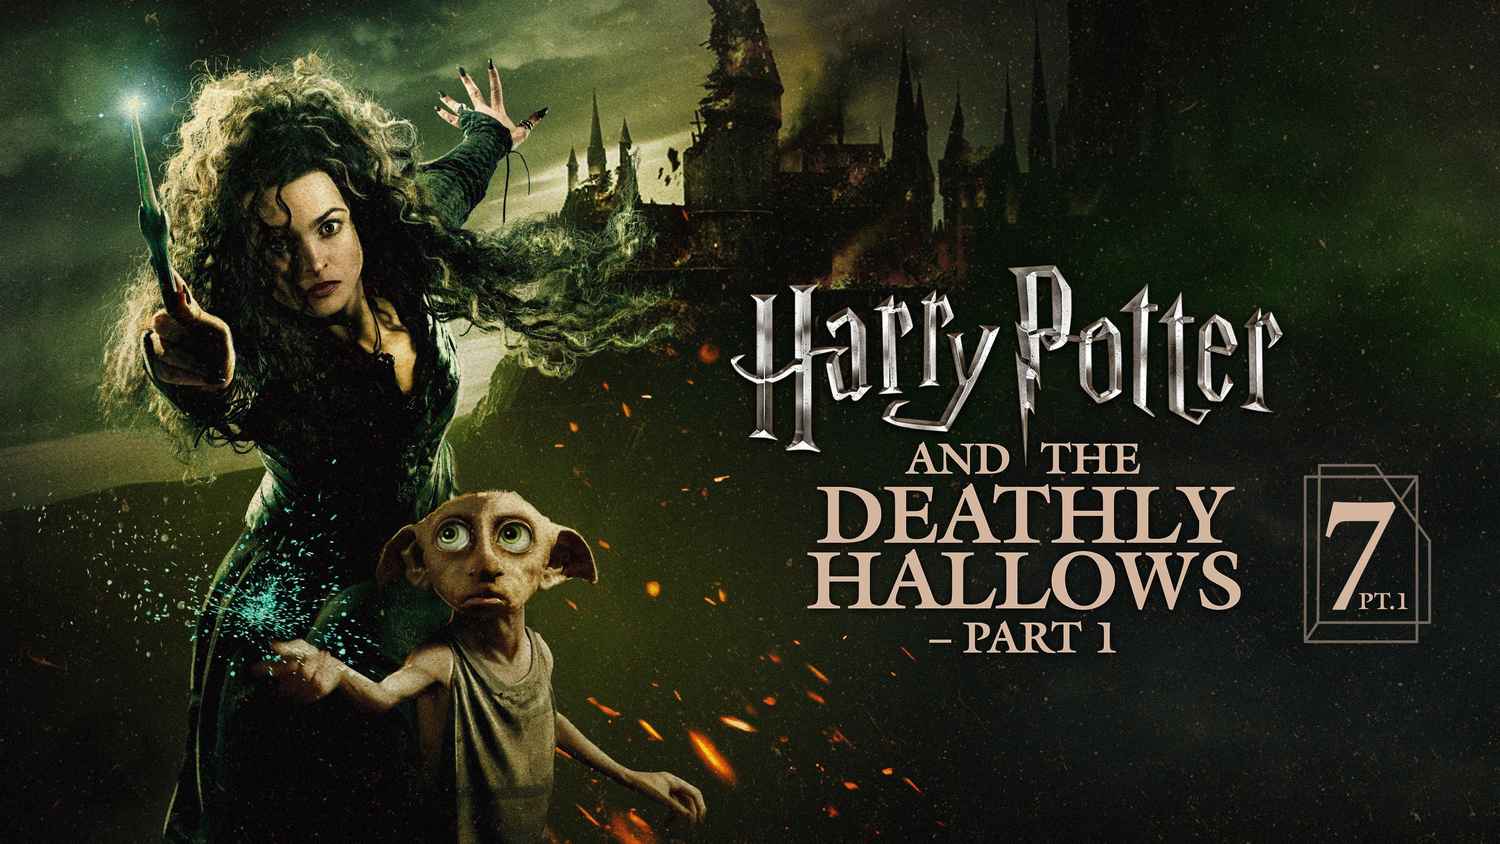 harry potter deathly hallows part 2 full movie 123movies